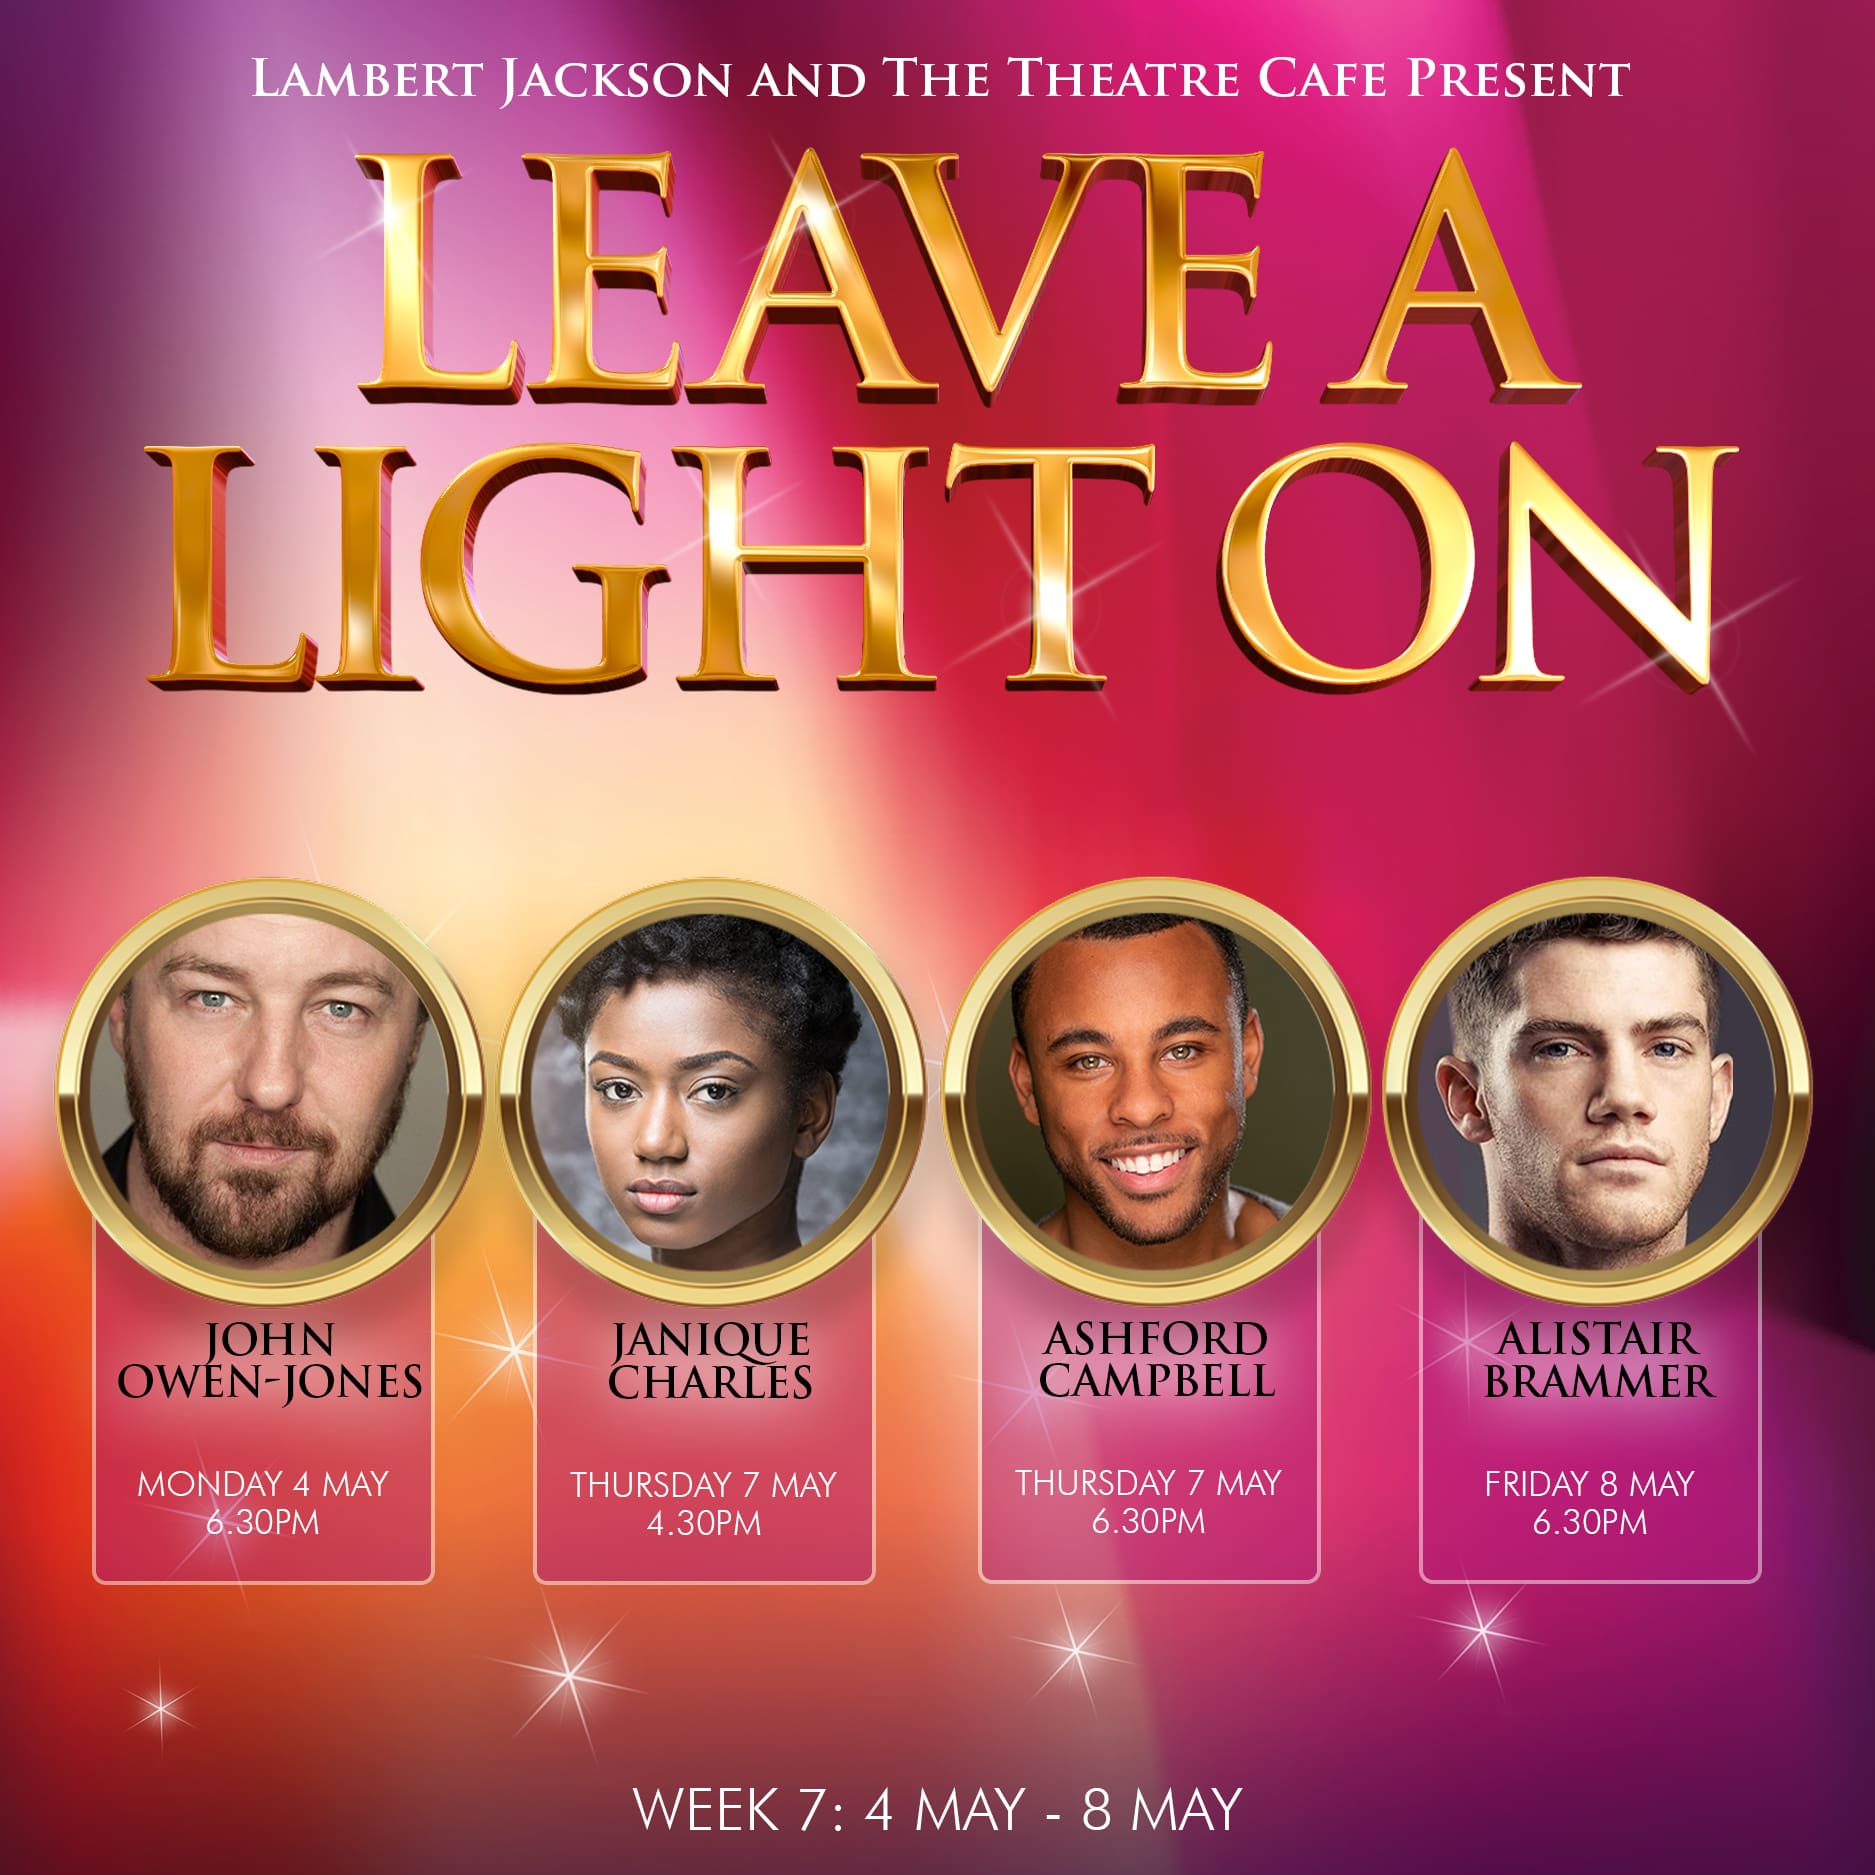 NEWS: Lineup announced for week 7 of Leave A Light On